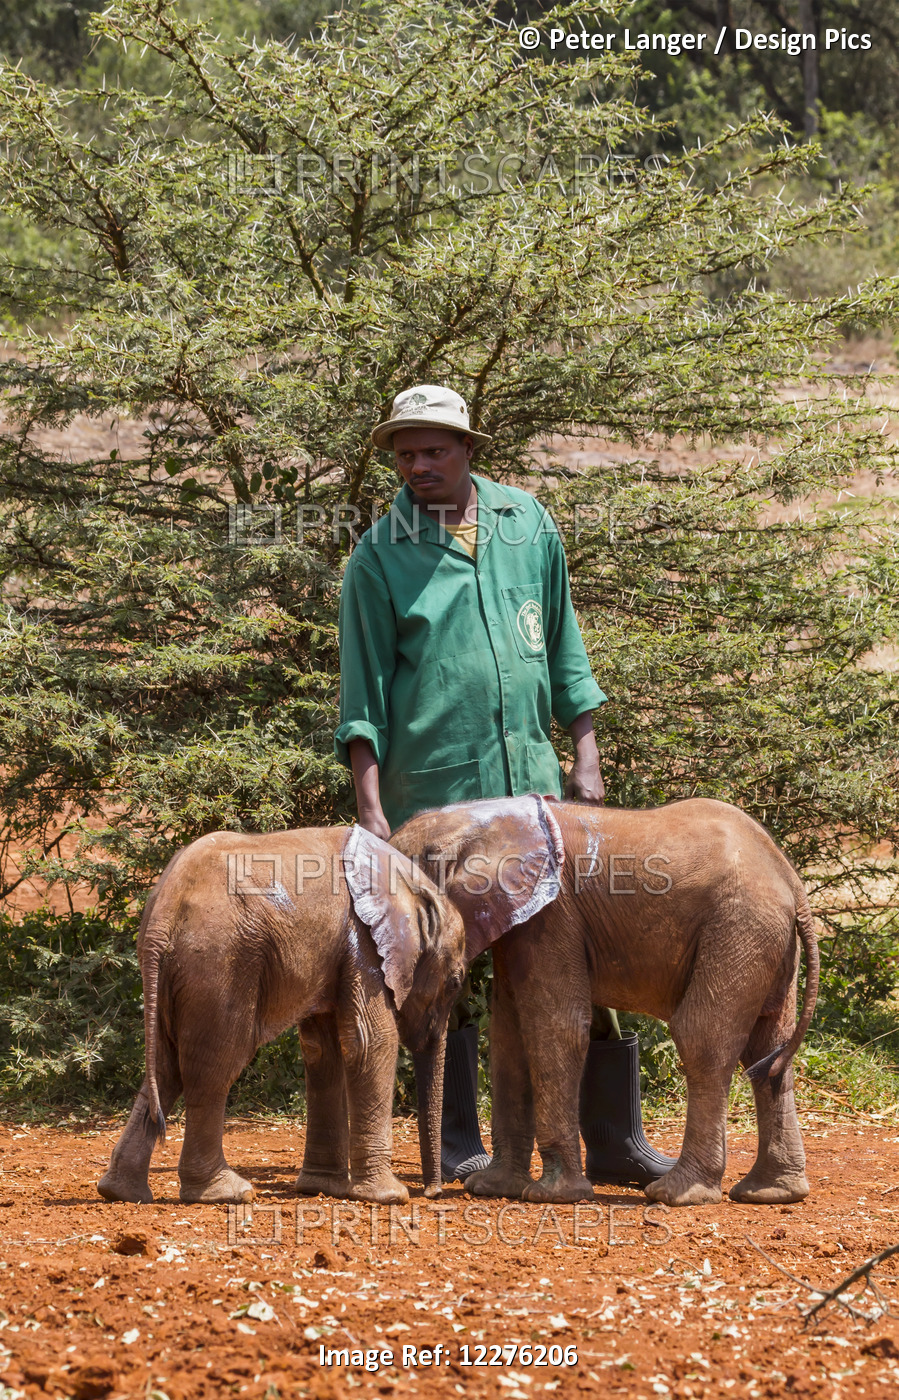 Worker And Orphaned African Elephants (Loxodonta Africana) At The Sheldrick ...